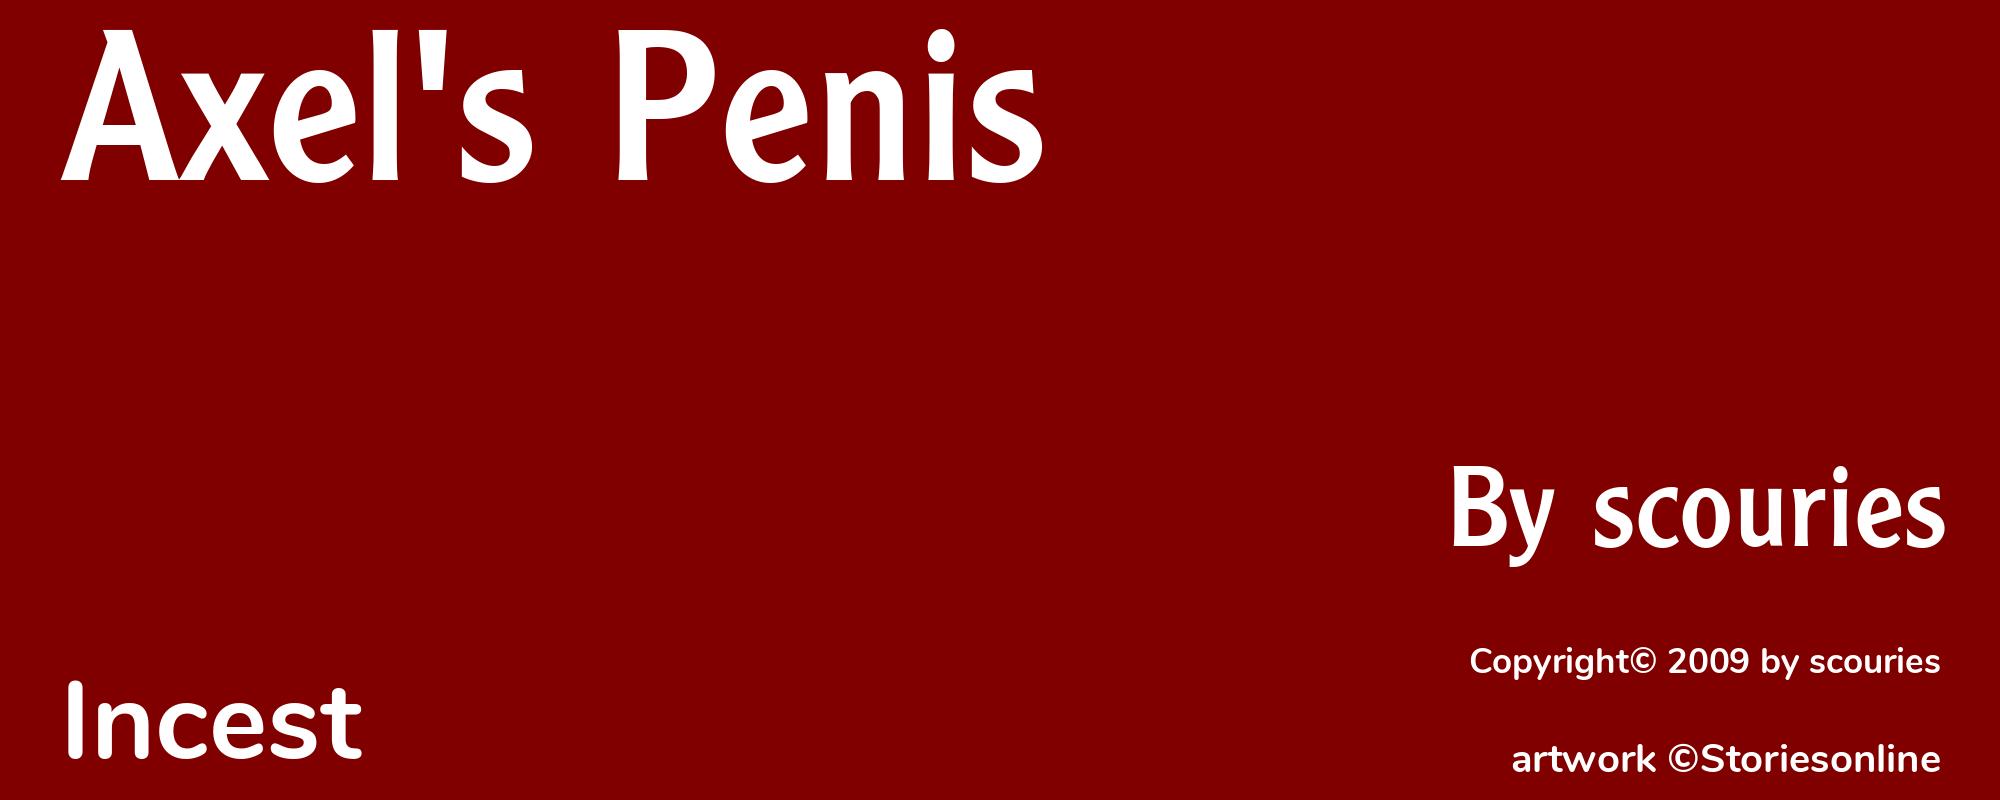 Axel's Penis - Cover